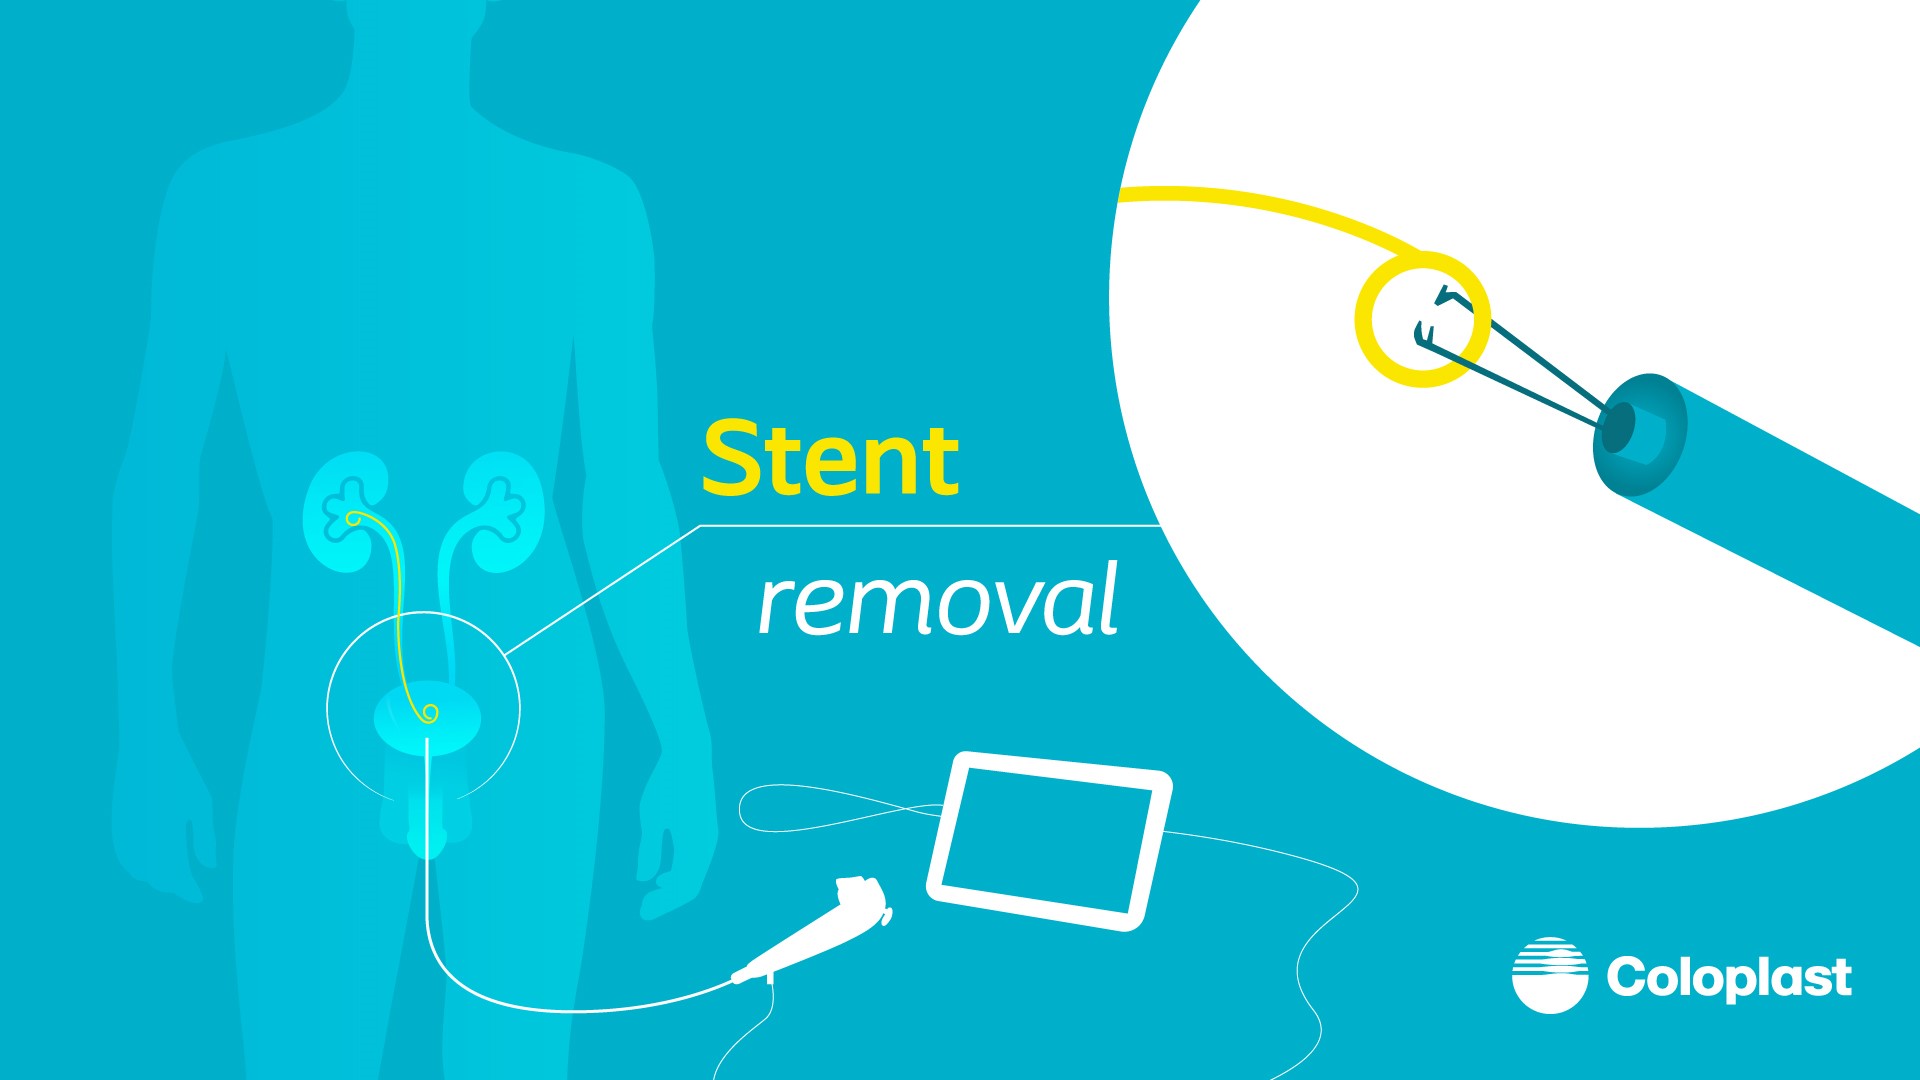 Challenges around Double-J stent removal